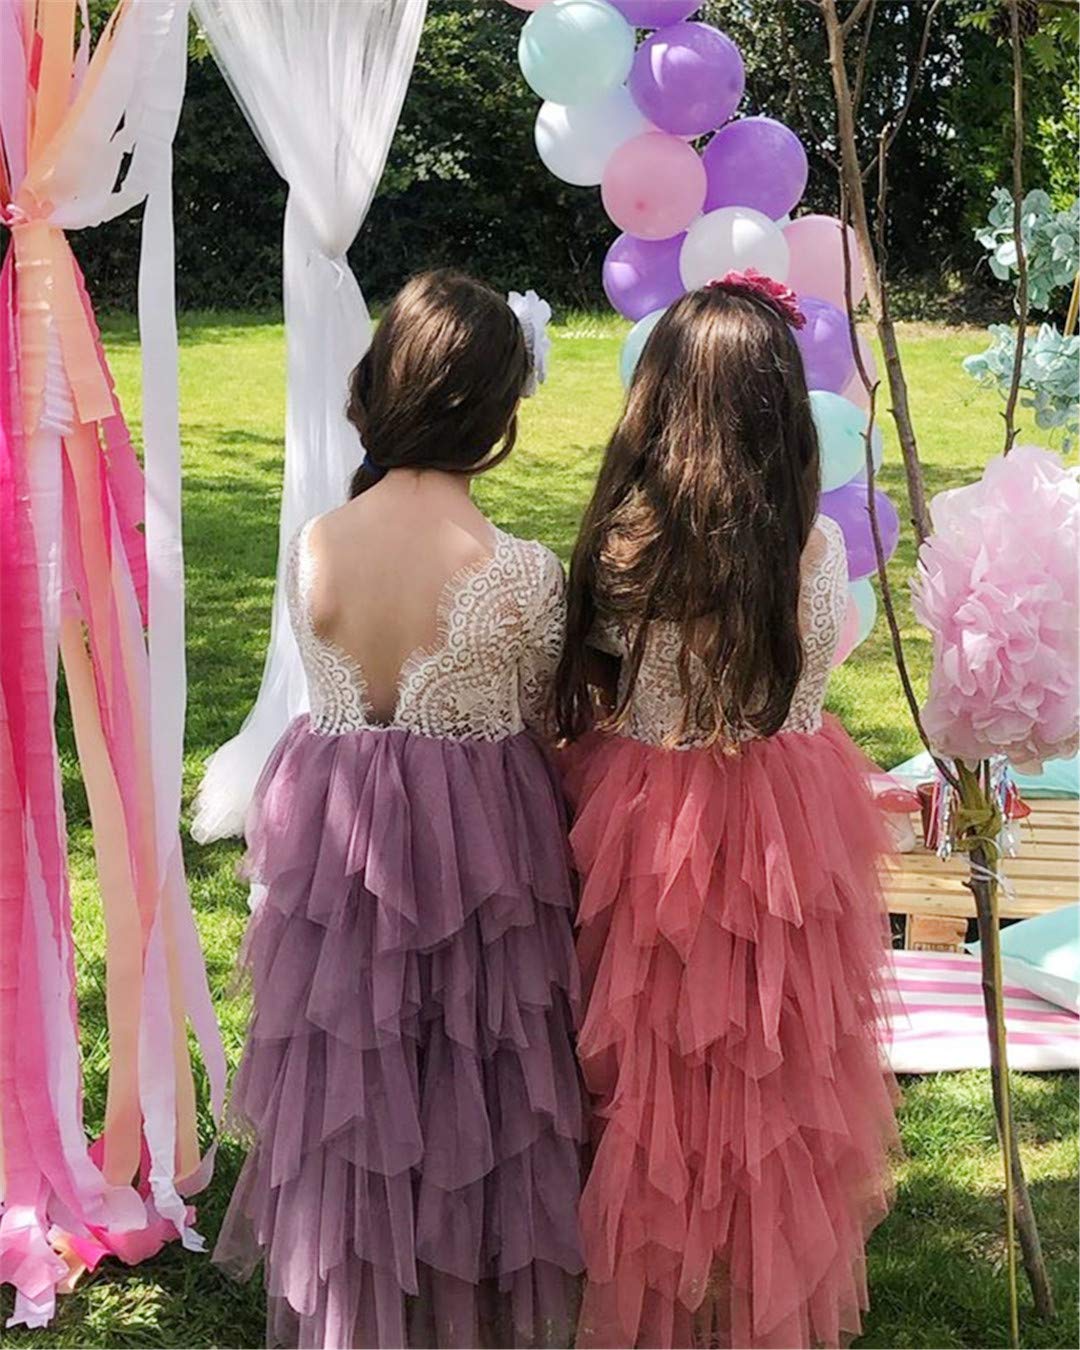 2Bunnies Flower Girl Dress Peony Lace Back A-Line Long Sleeve Tiered Tulle Maxi (Mauve) - 2BUNNIES